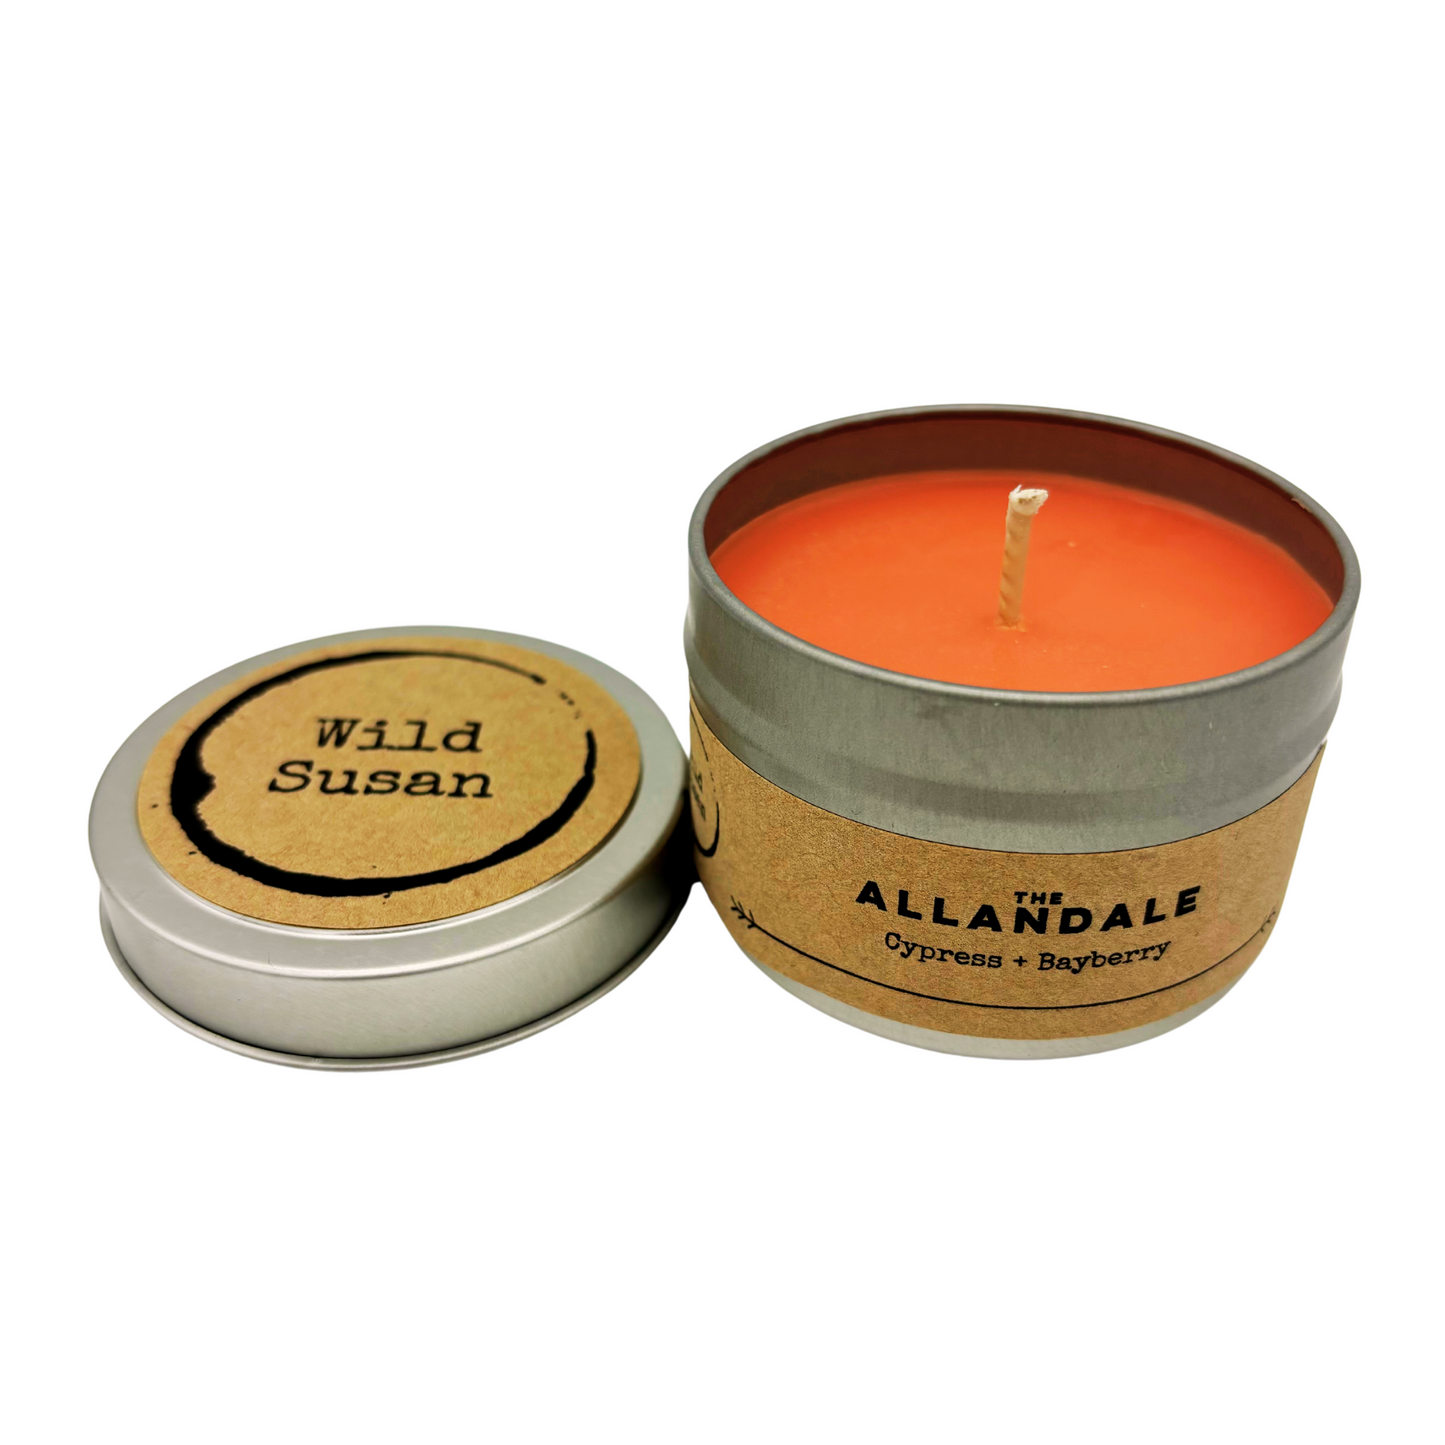 Allandale [Cypress + Bayberry] Soy Candle/Wax Melt